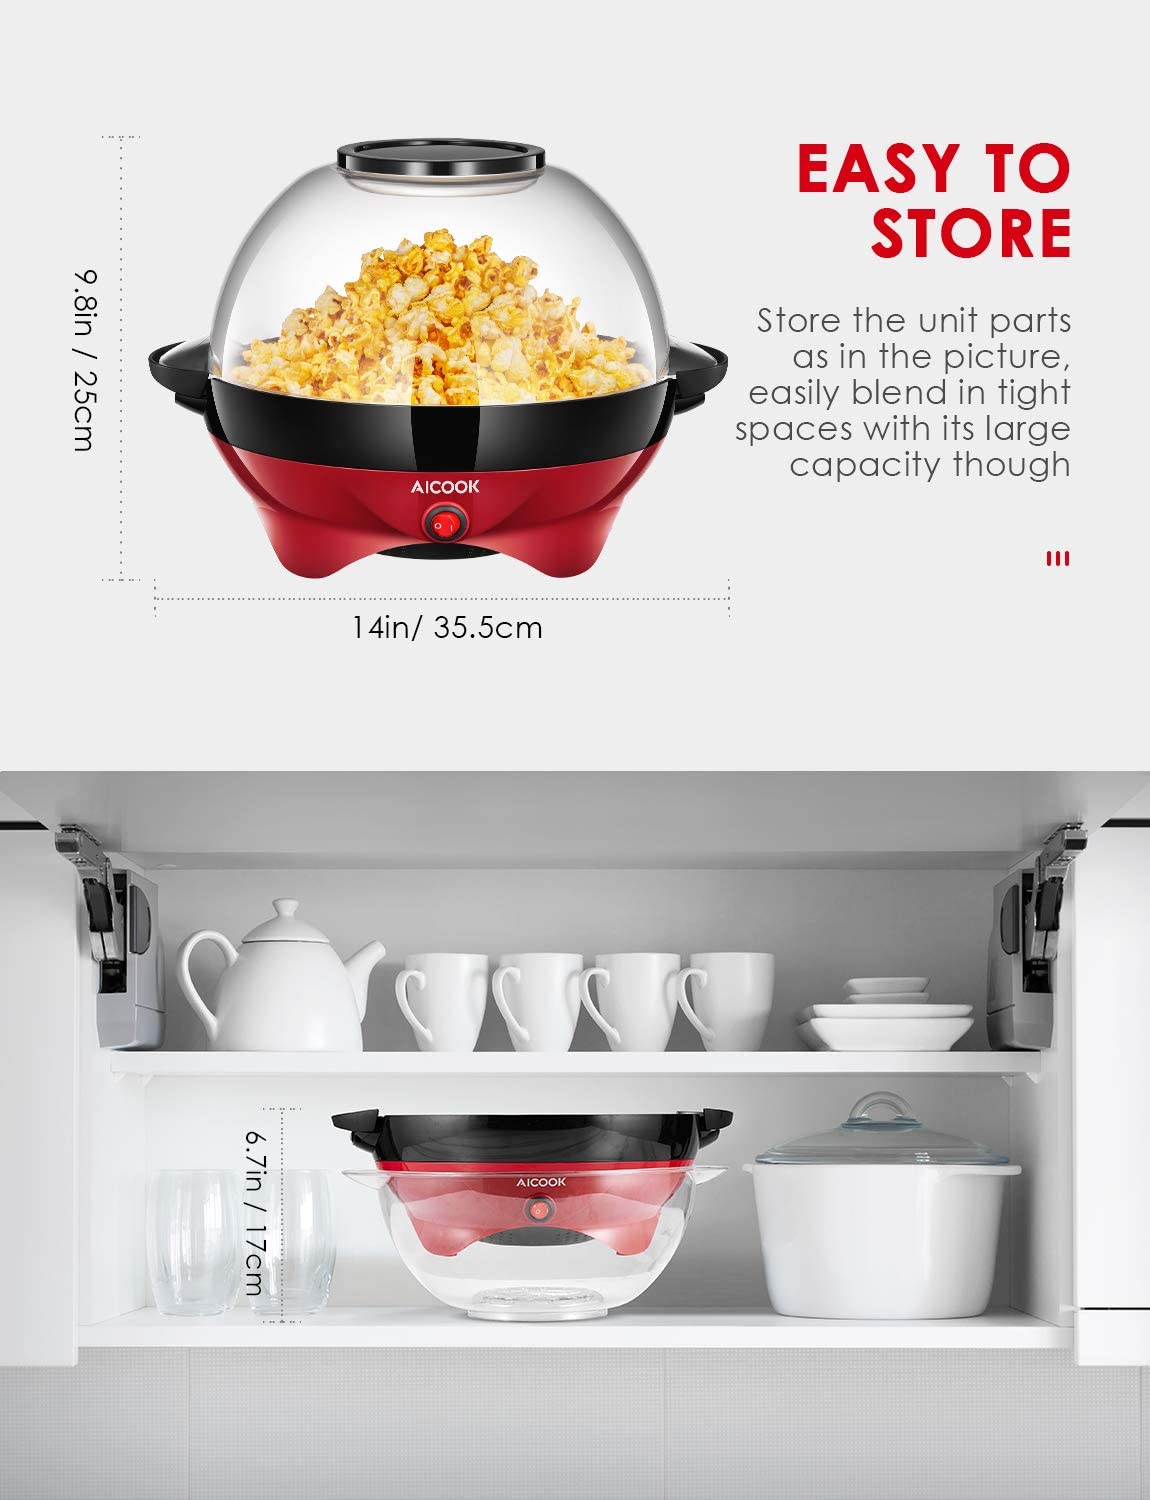 Popcorn Machine, AICOOK 6-Quart/24-Cup 800W Fast Heat-up Popcorn Popper Machine, Electric Hot Oil Butter Popcorn Maker with Stirring Rod, Nonstick Plate, Dishwasher Safe, Easy To Store, Red